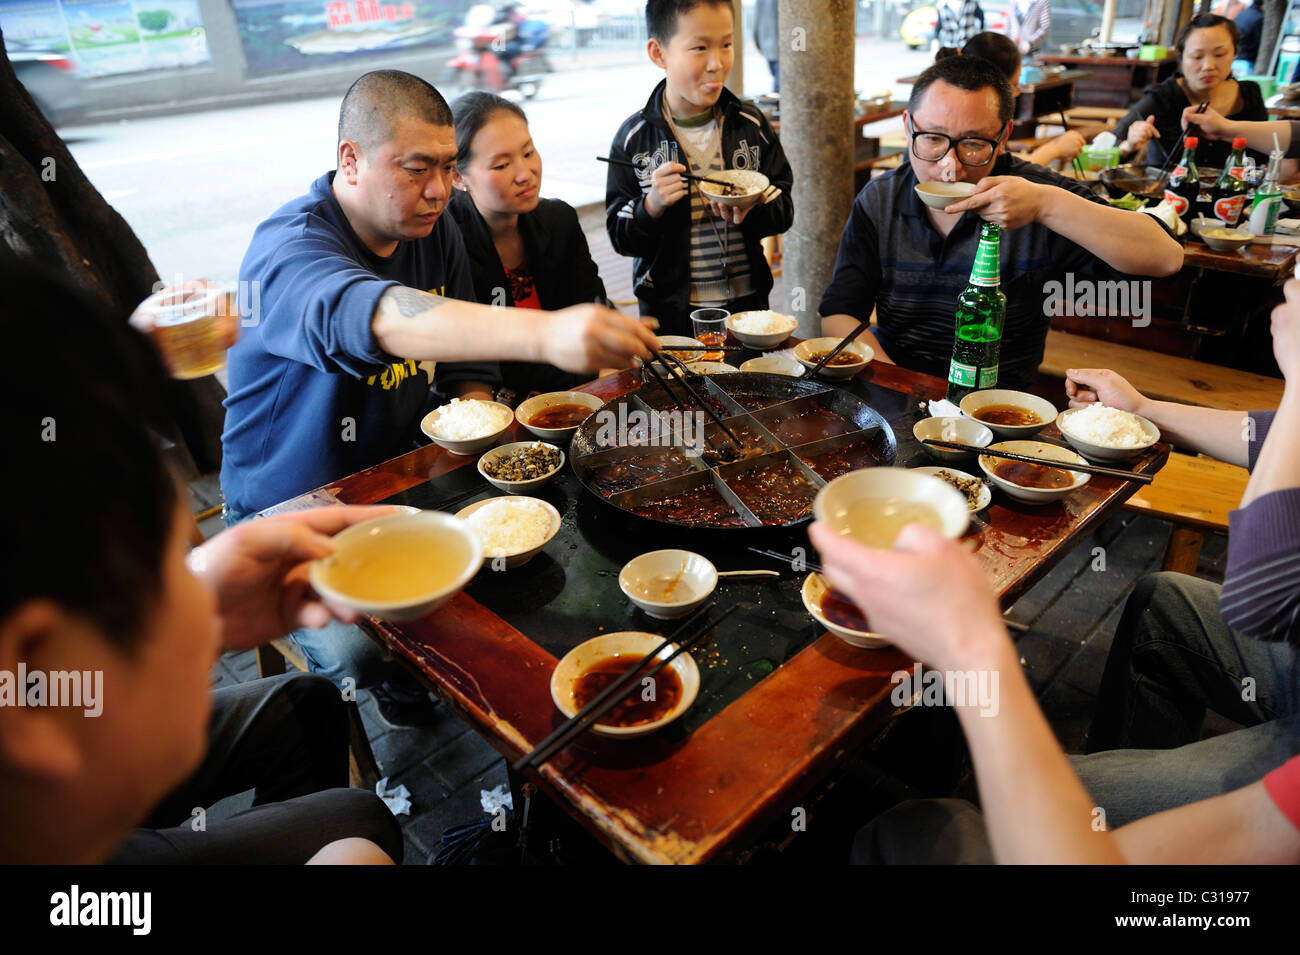 Residents have Hotpot in Chongqing, China. 22-Apr-2011 Stock Photo